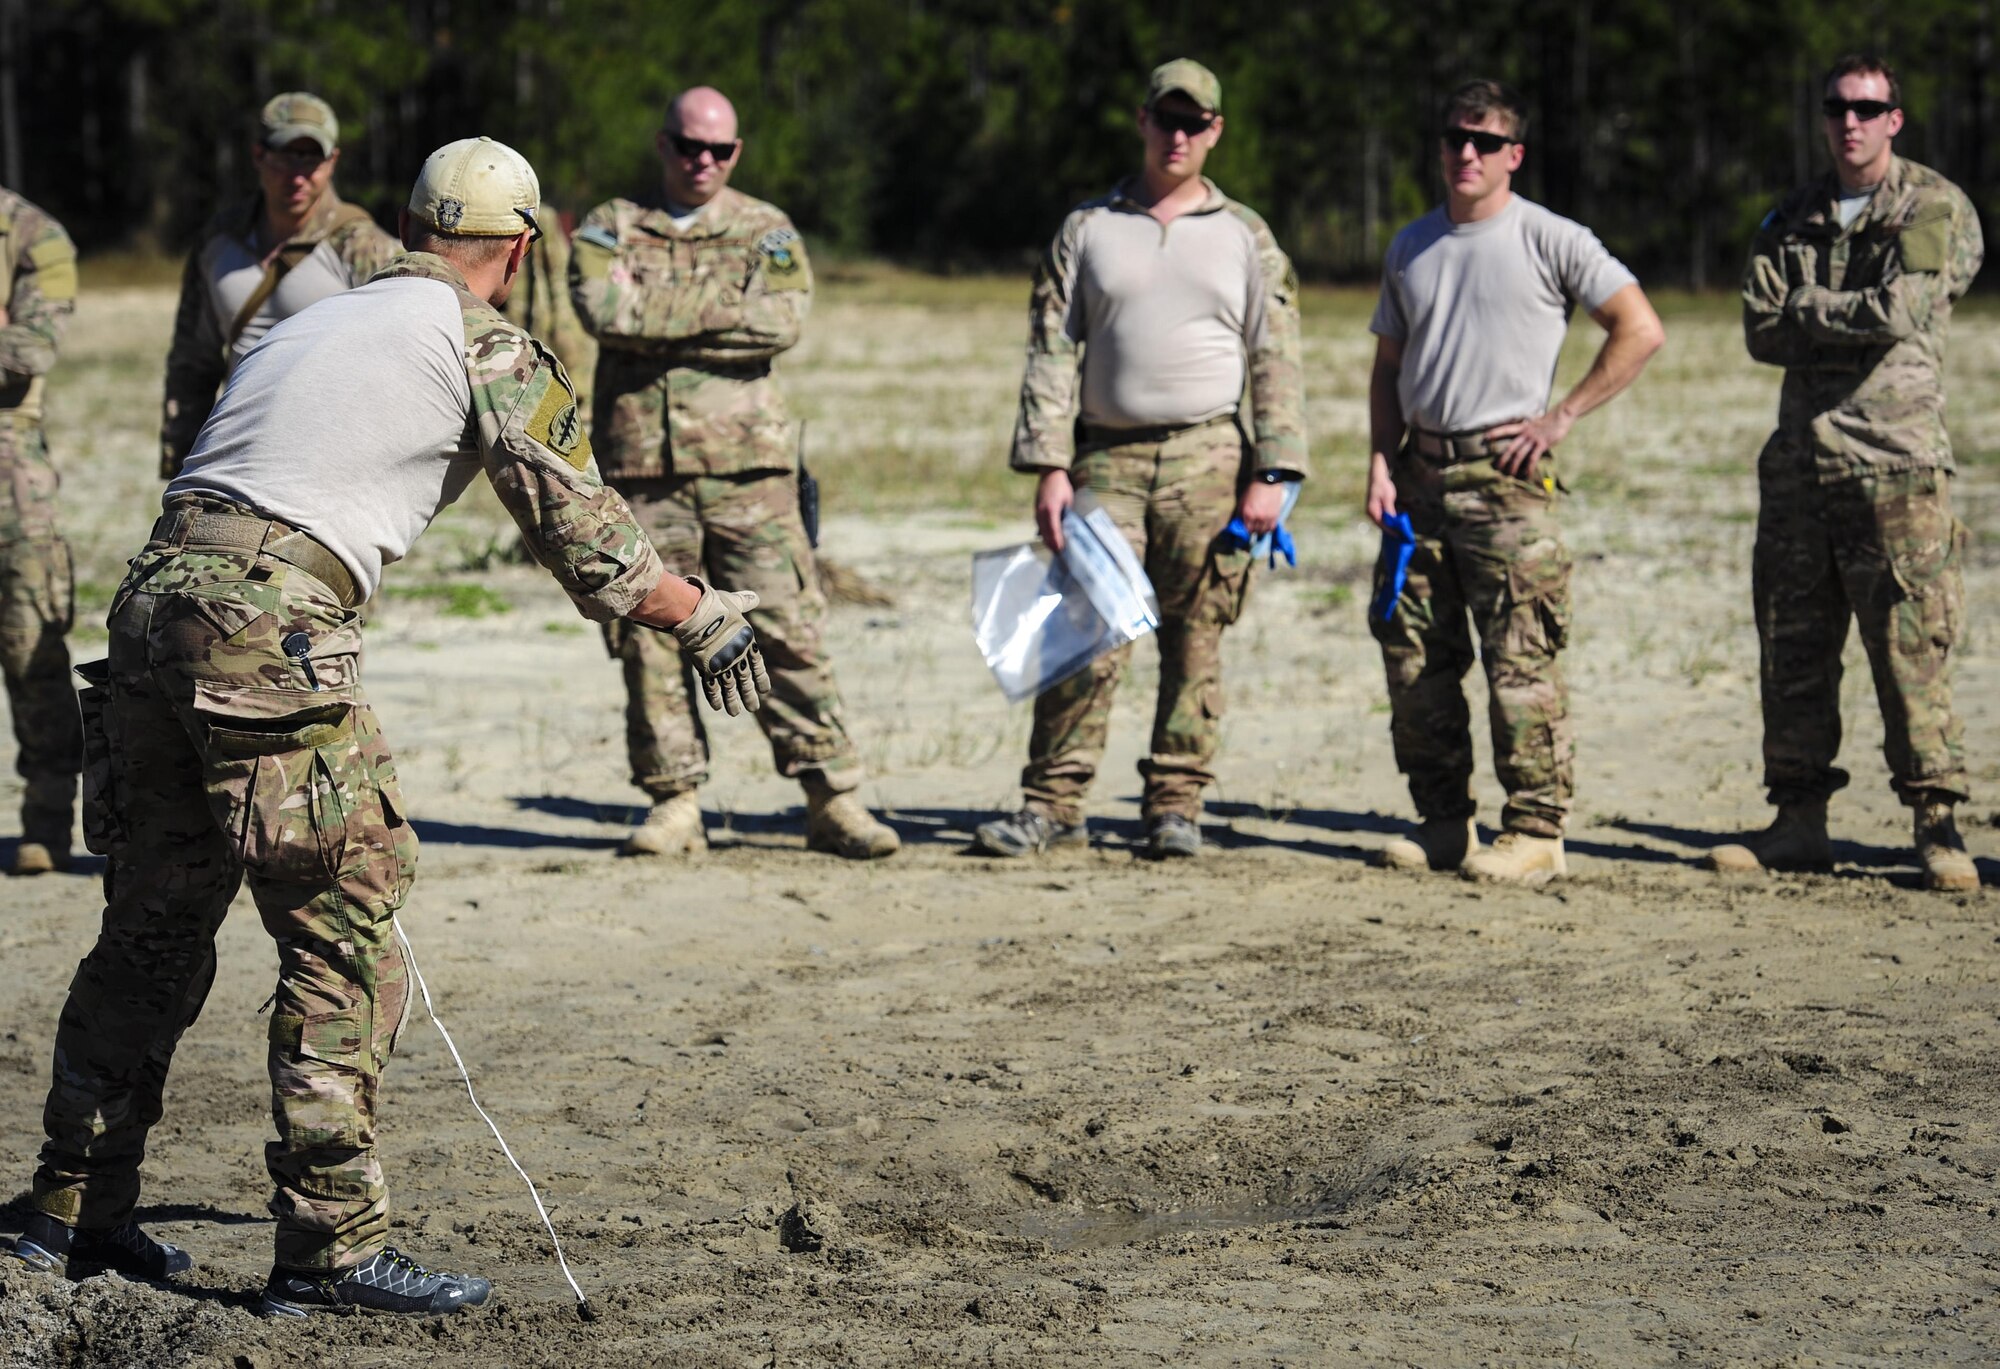 Master Sgt. Ronnie Brickey, an explosive ordnance disposal operations section chief with the 1st Special Operations Civil Engineer Squadron, speaks to Airmen during post-blast analysis training at Hurlburt Field, Fla., Nov. 19, 2015. A Post-blast analysis takes place when an improvised explosive device detonates and EOD Airmen arrive on scene to determine what happened. (U.S. Air Force photo by Senior Airman Meagan Schutter)